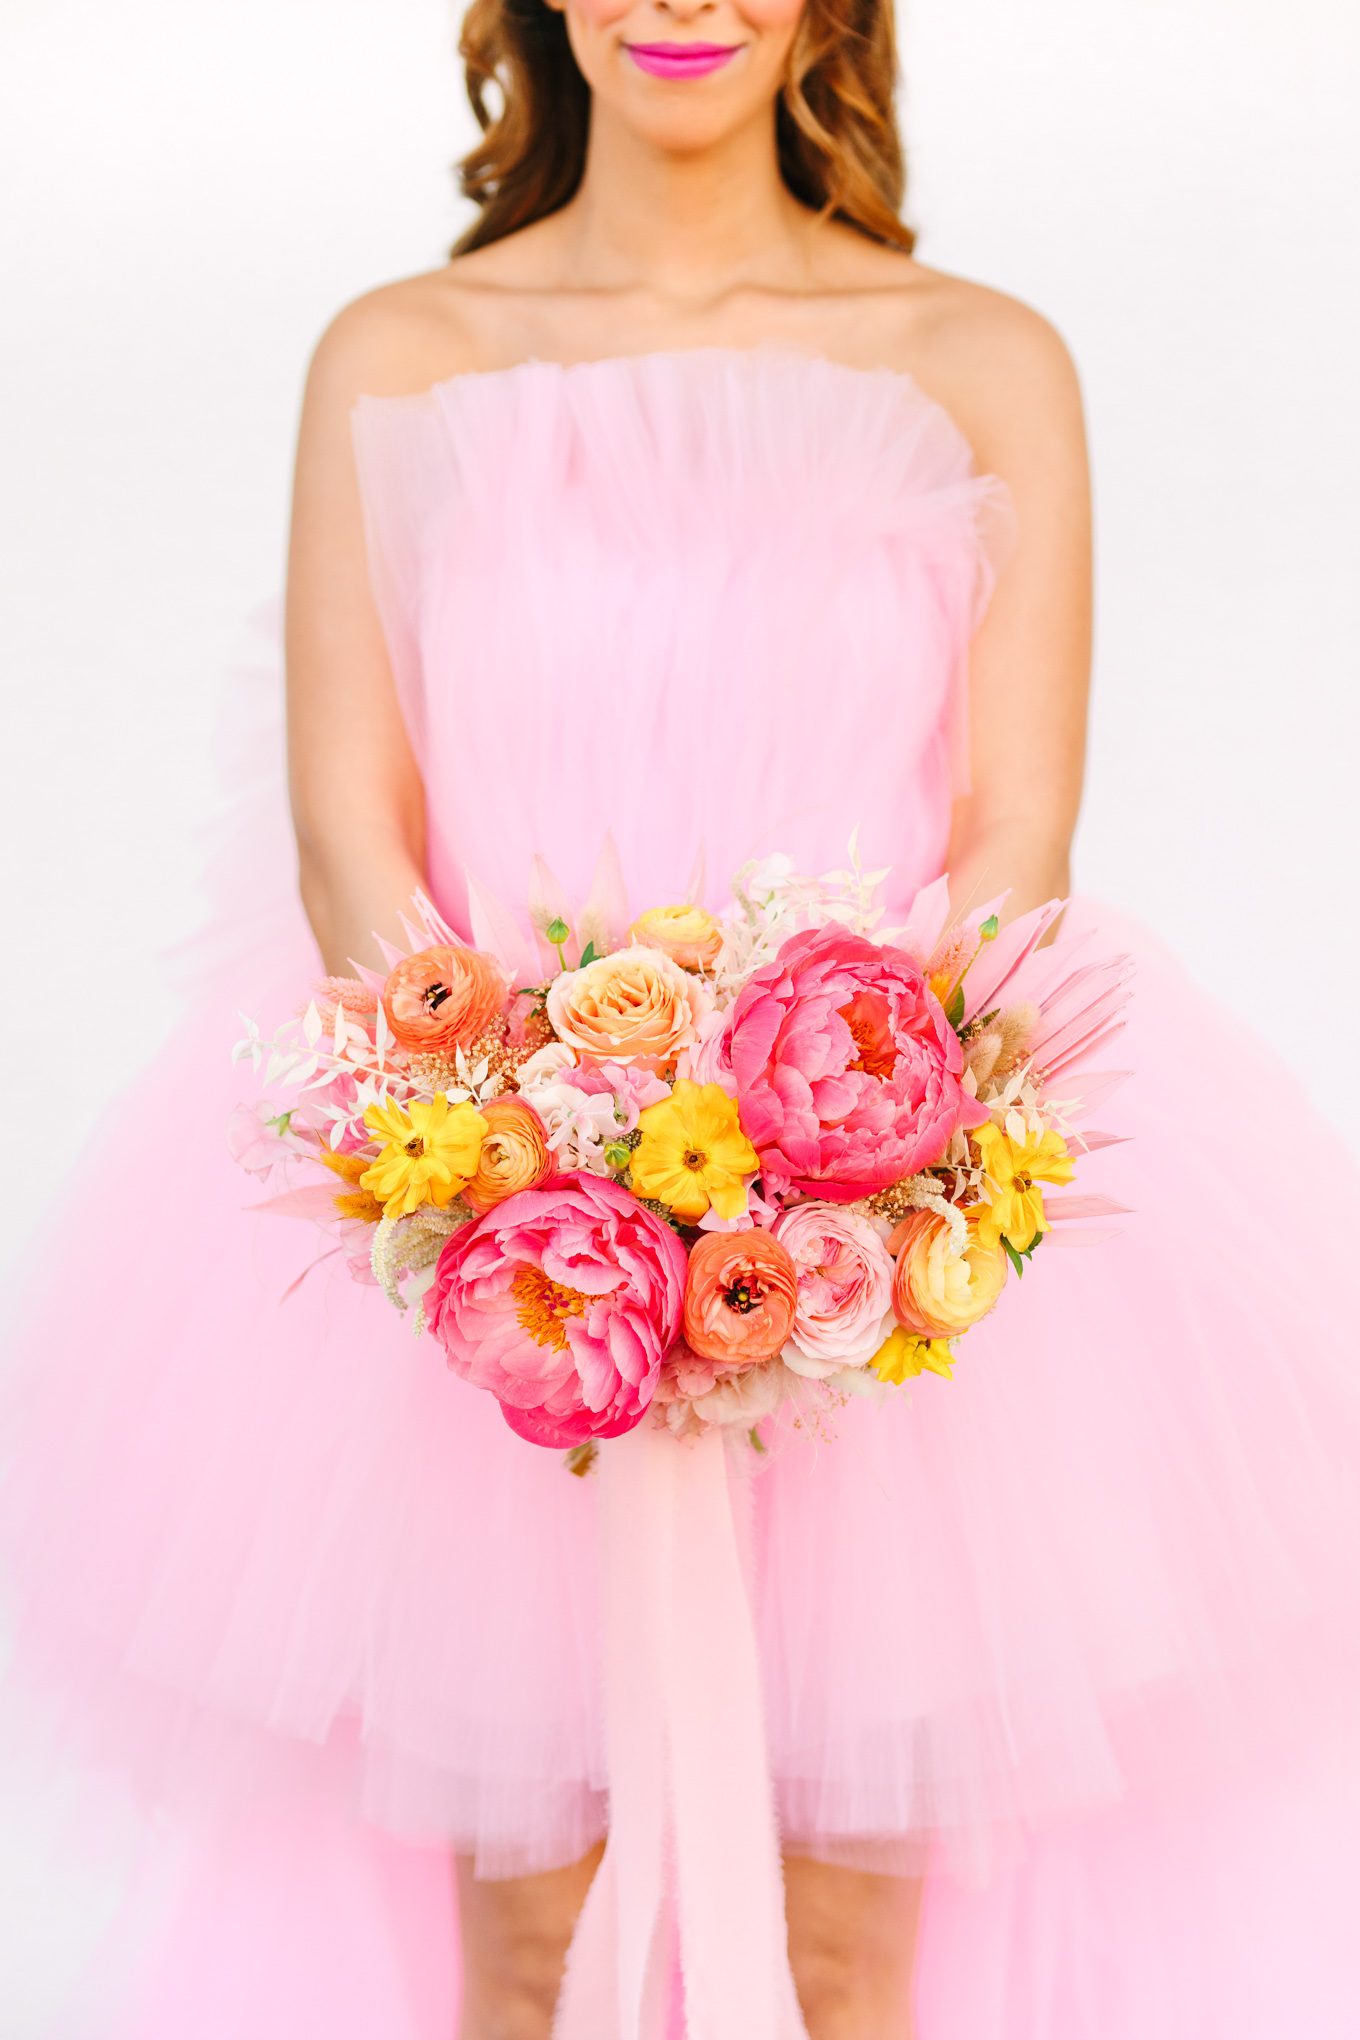 Playful pink peony bouquet with pink wedding dress | Beautiful bridal bouquet inspiration and advice | Colorful and elevated wedding photography for fun-loving couples in Southern California | #weddingflowers #weddingbouquet #bridebouquet #bouquetideas #uniquebouquet   Source: Mary Costa Photography | Los Angeles